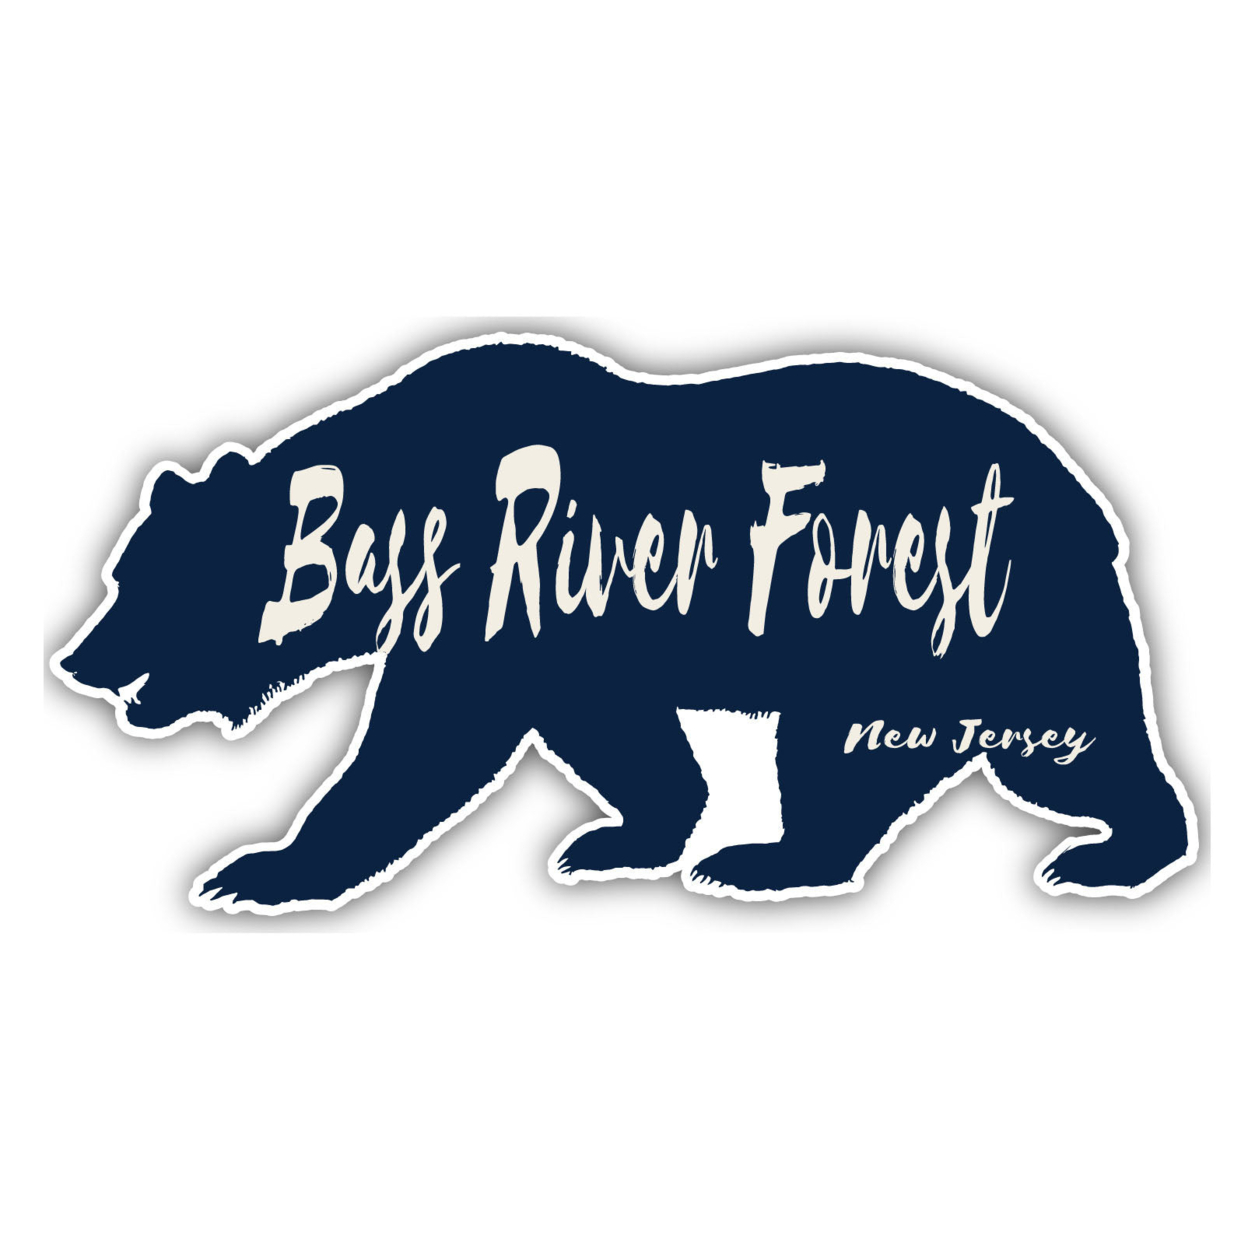 Bass River Forest New Jersey Souvenir Decorative Stickers (Choose Theme And Size) - Single Unit, 4-Inch, Bear